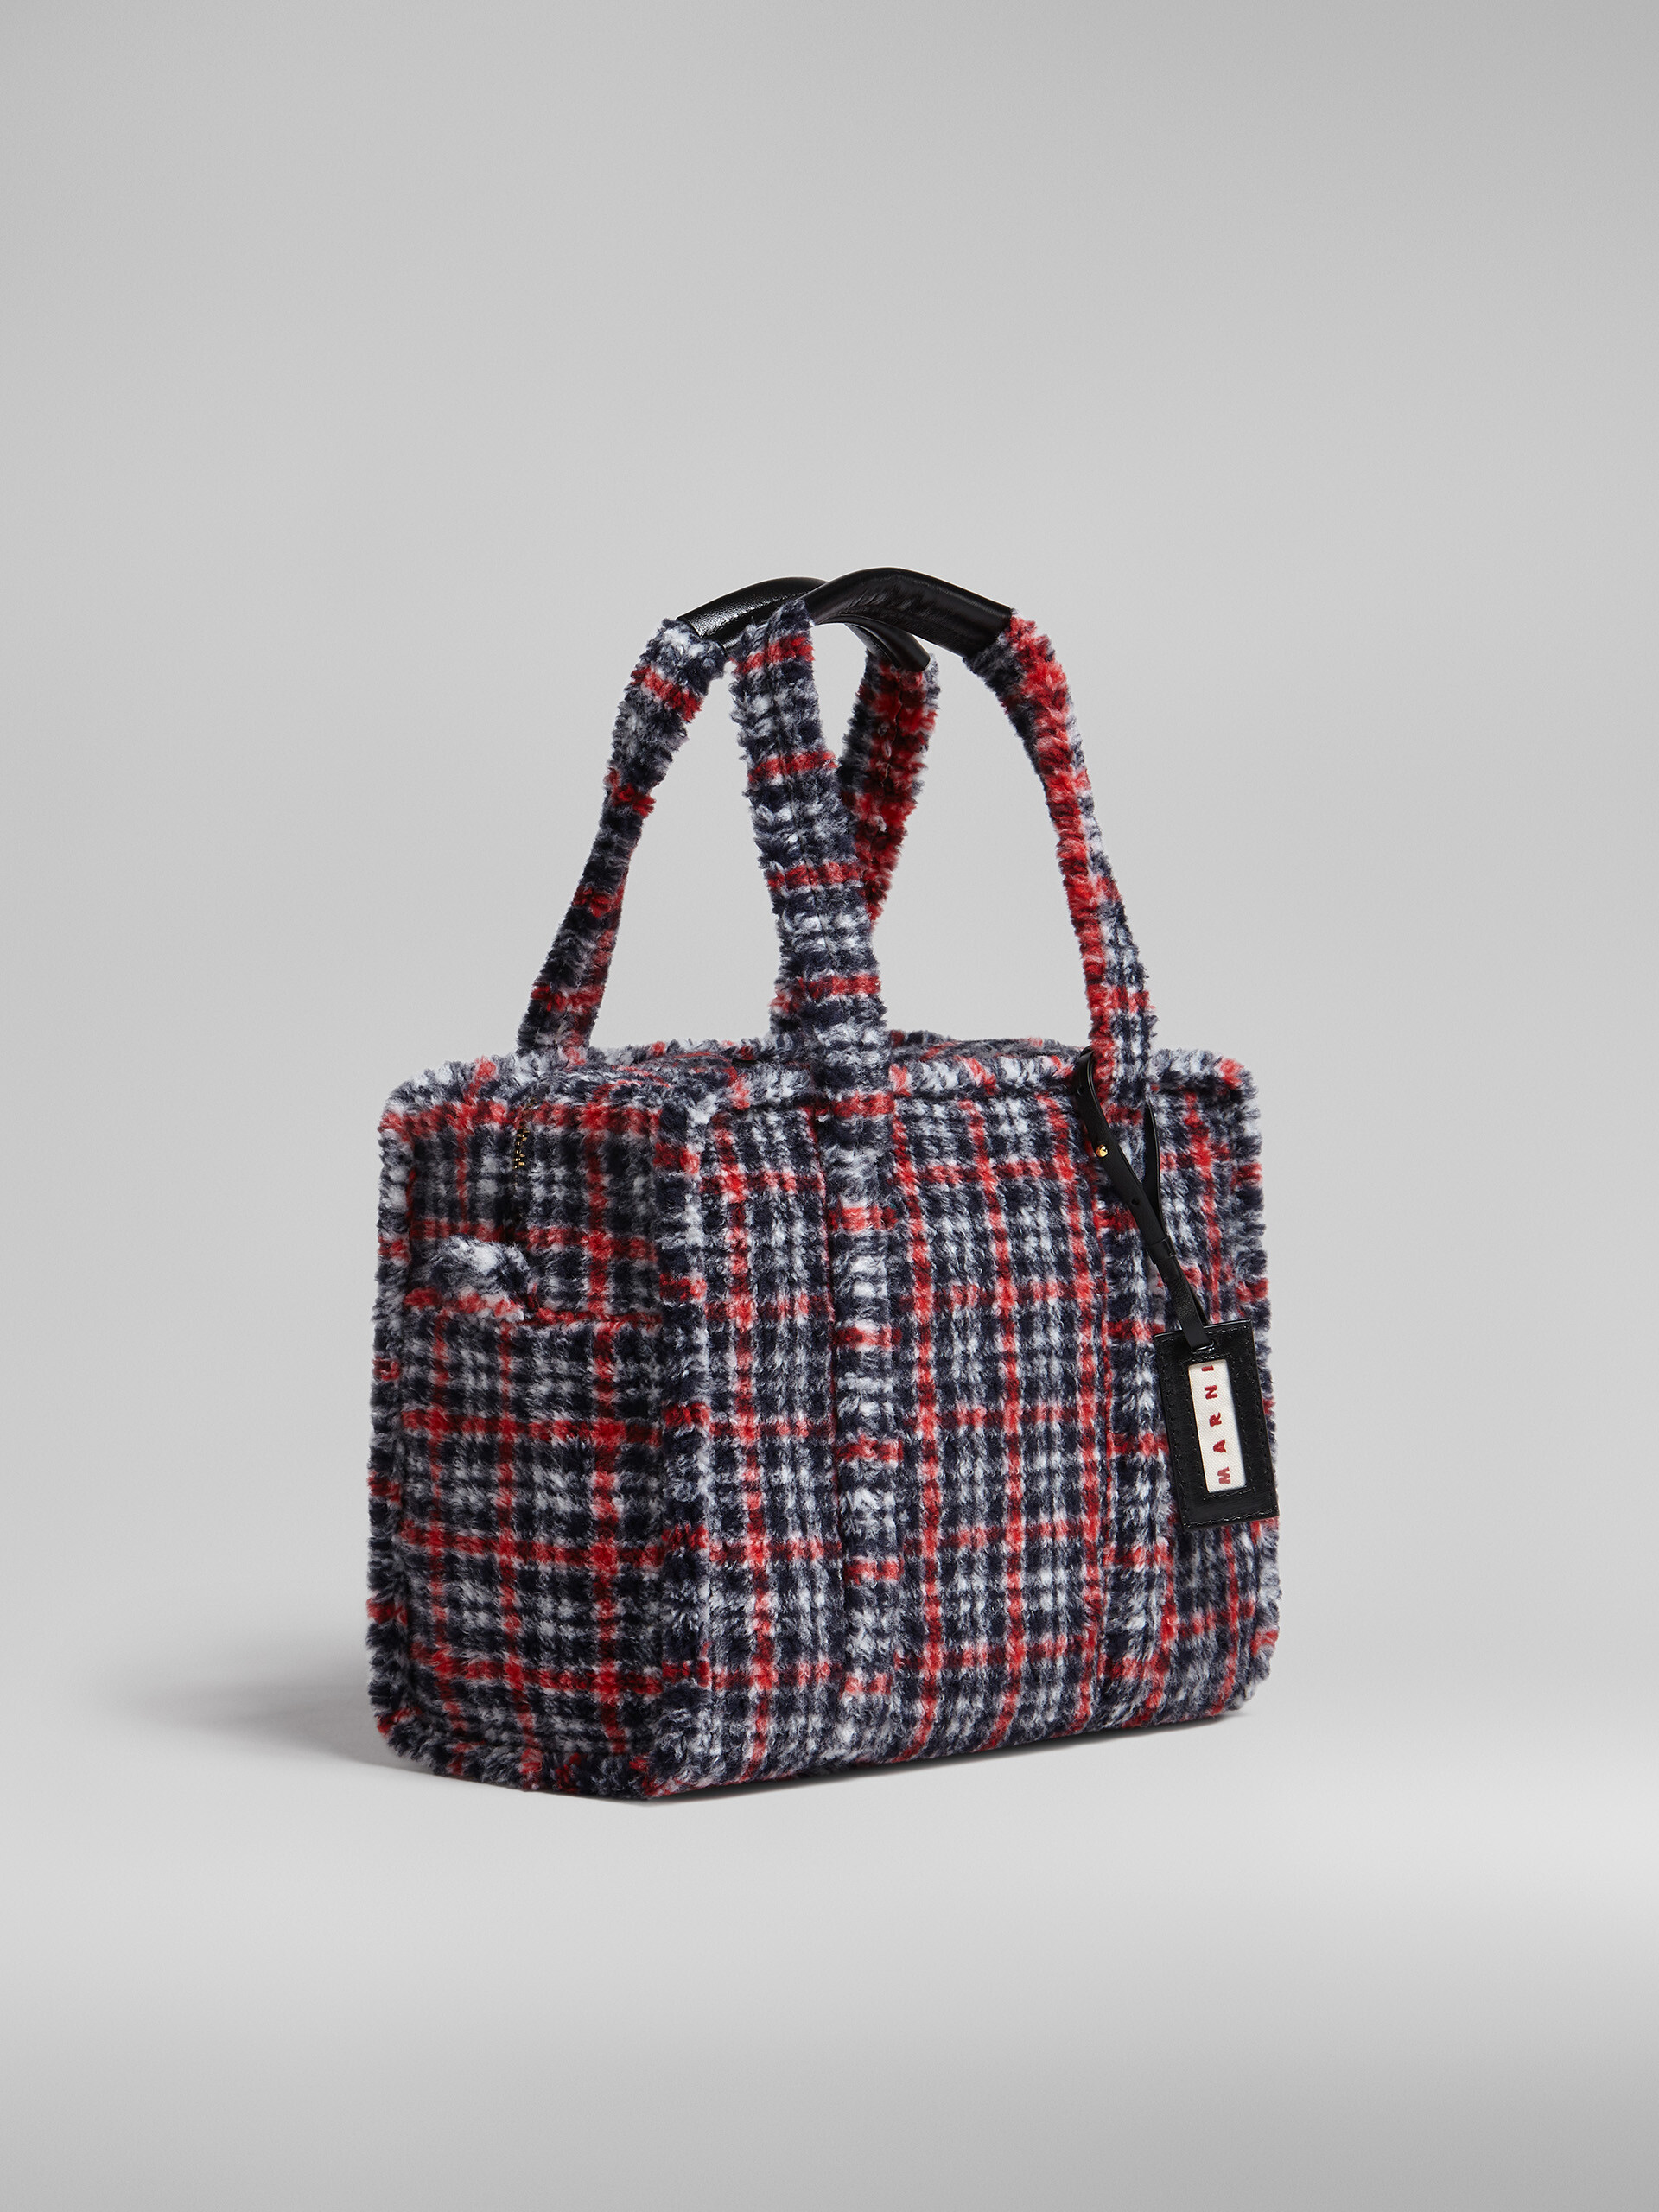 Small travel bag in check fabric - Shopping Bags - Image 6